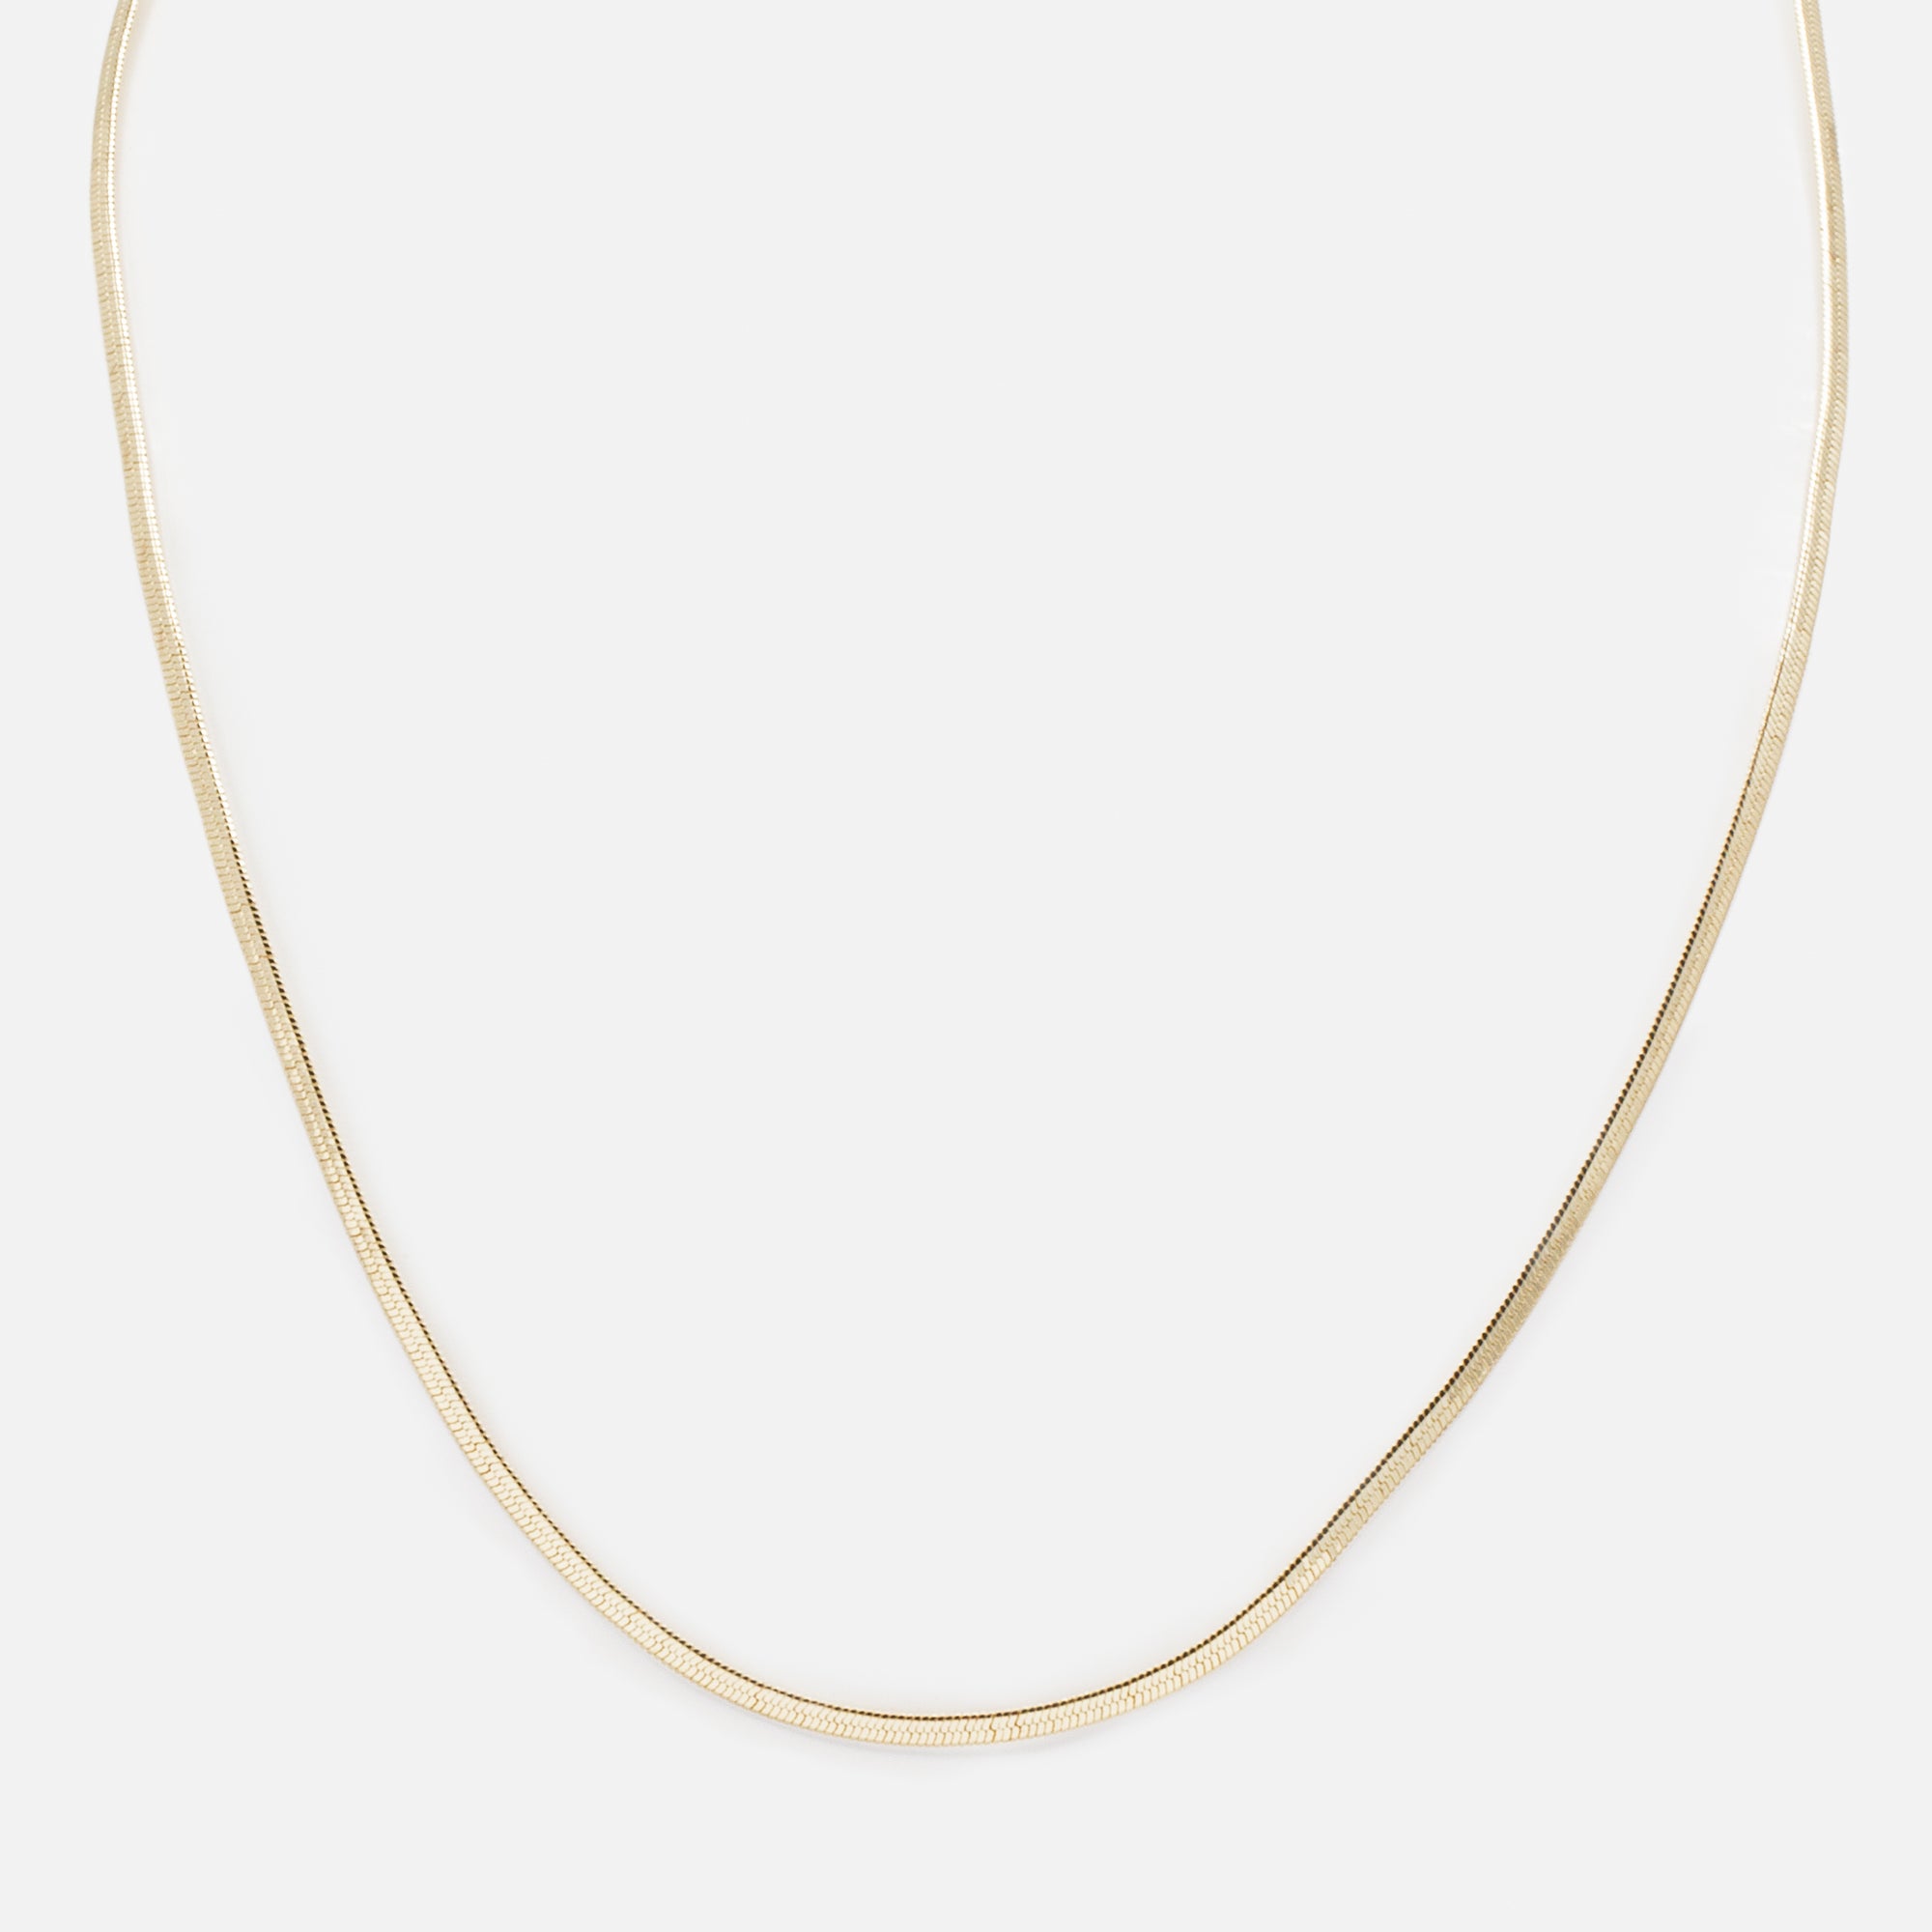 Gold chain with flat serpentine links